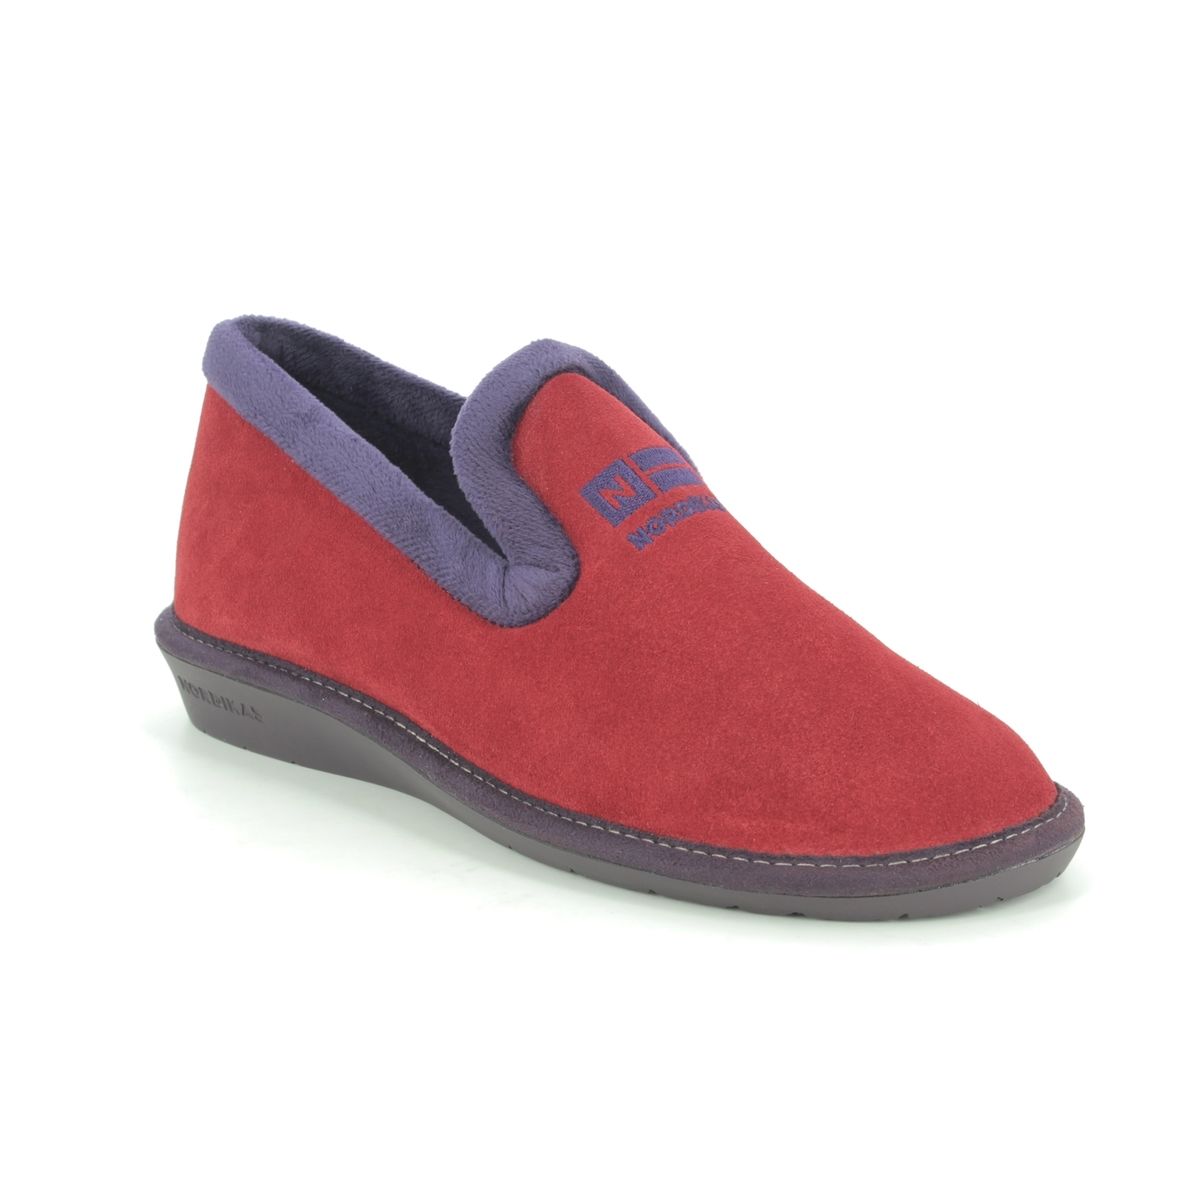 Nordikas Tabackin Red Suede Womens Slippers 305-4   Nicola 3 In Size 40 In Plain Red Suede